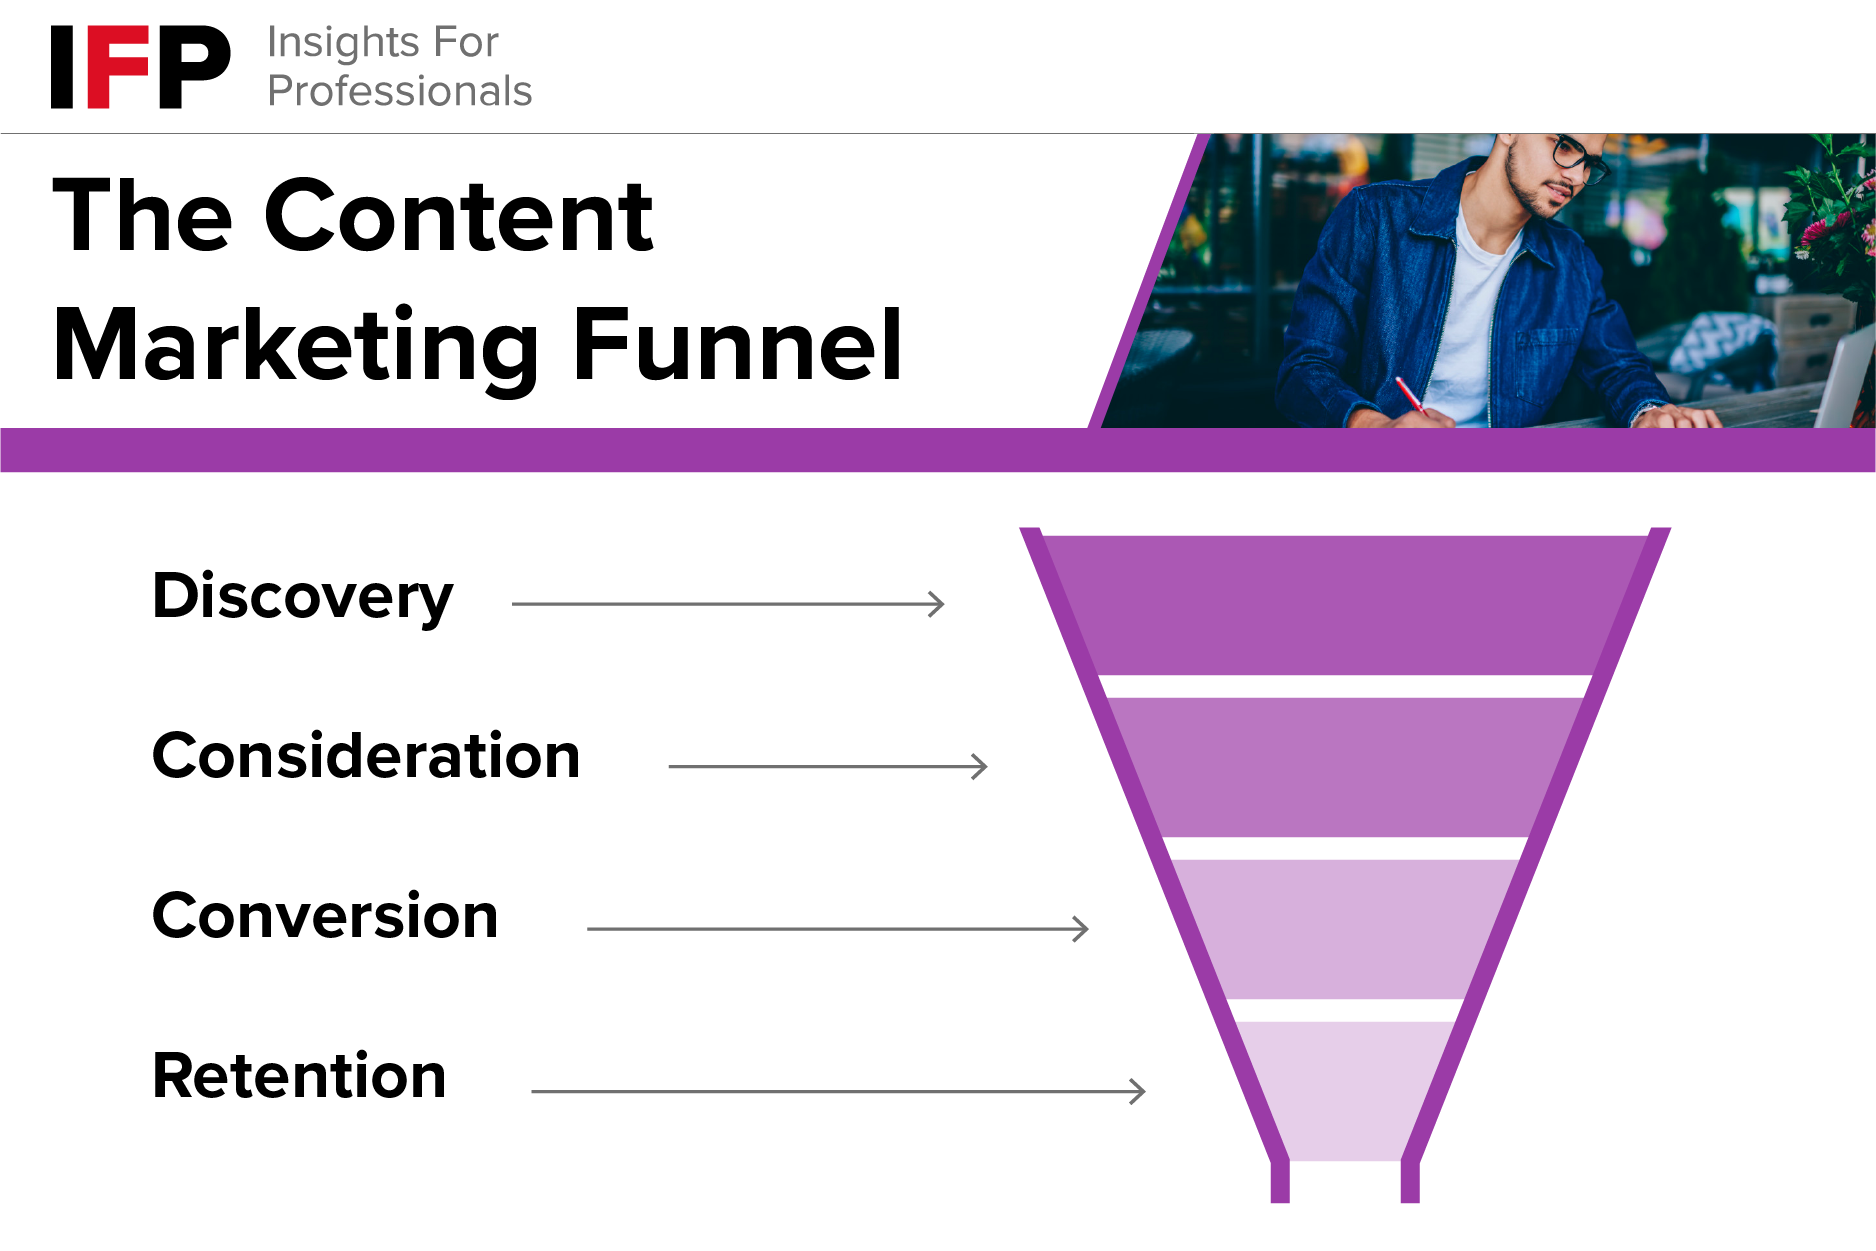 IFP content marketing funnel - discovery to retention